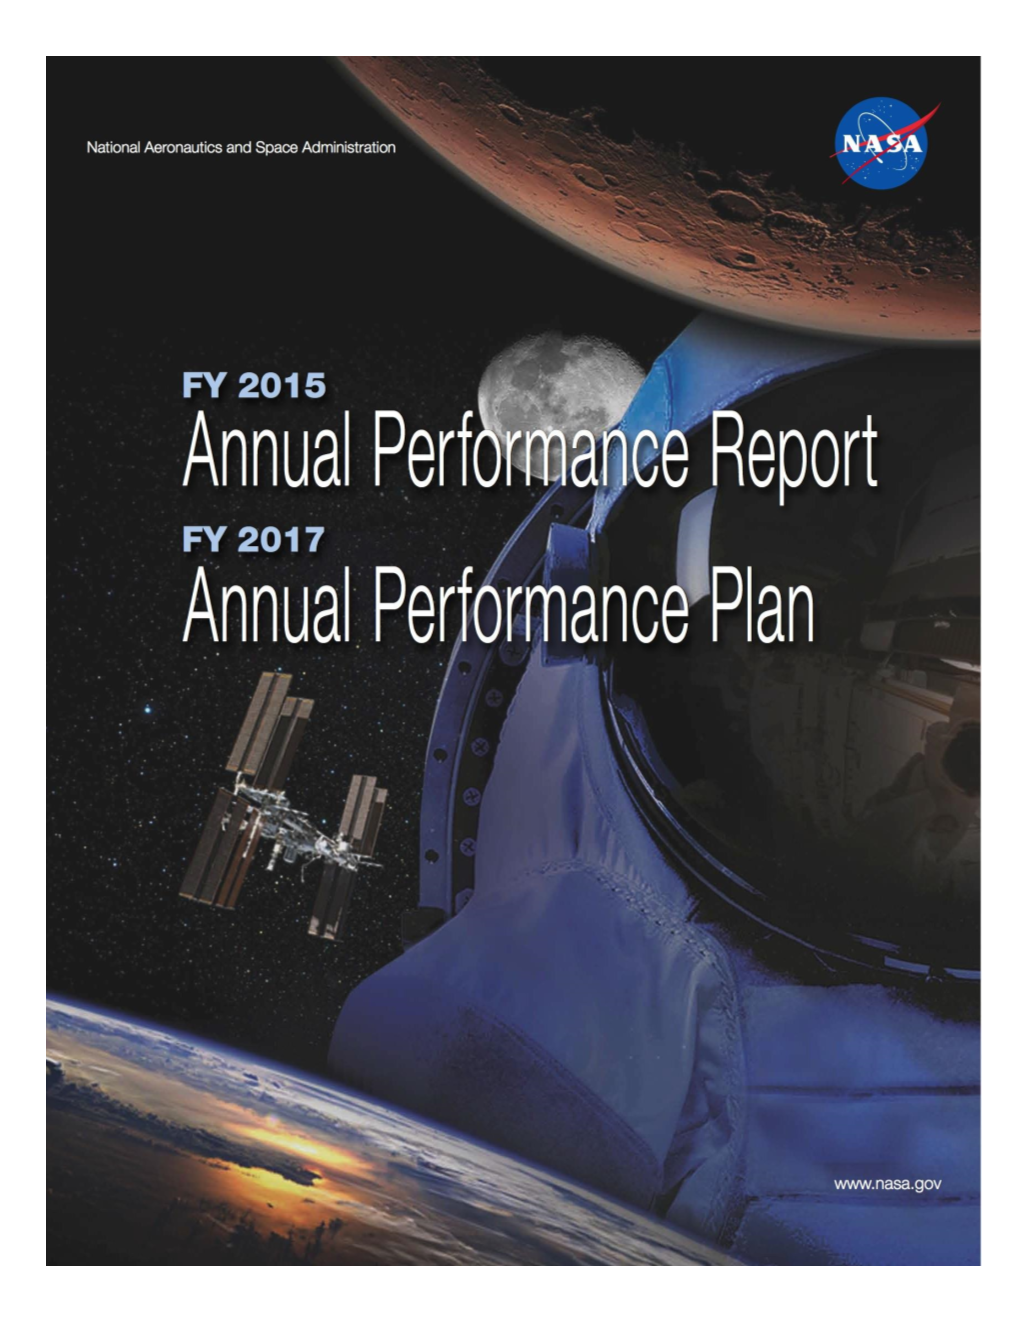 FY 2015 Annual Performance Report and FY 2017 Annual Performance Plan1 Builds Upon the Strategic Plan Framework